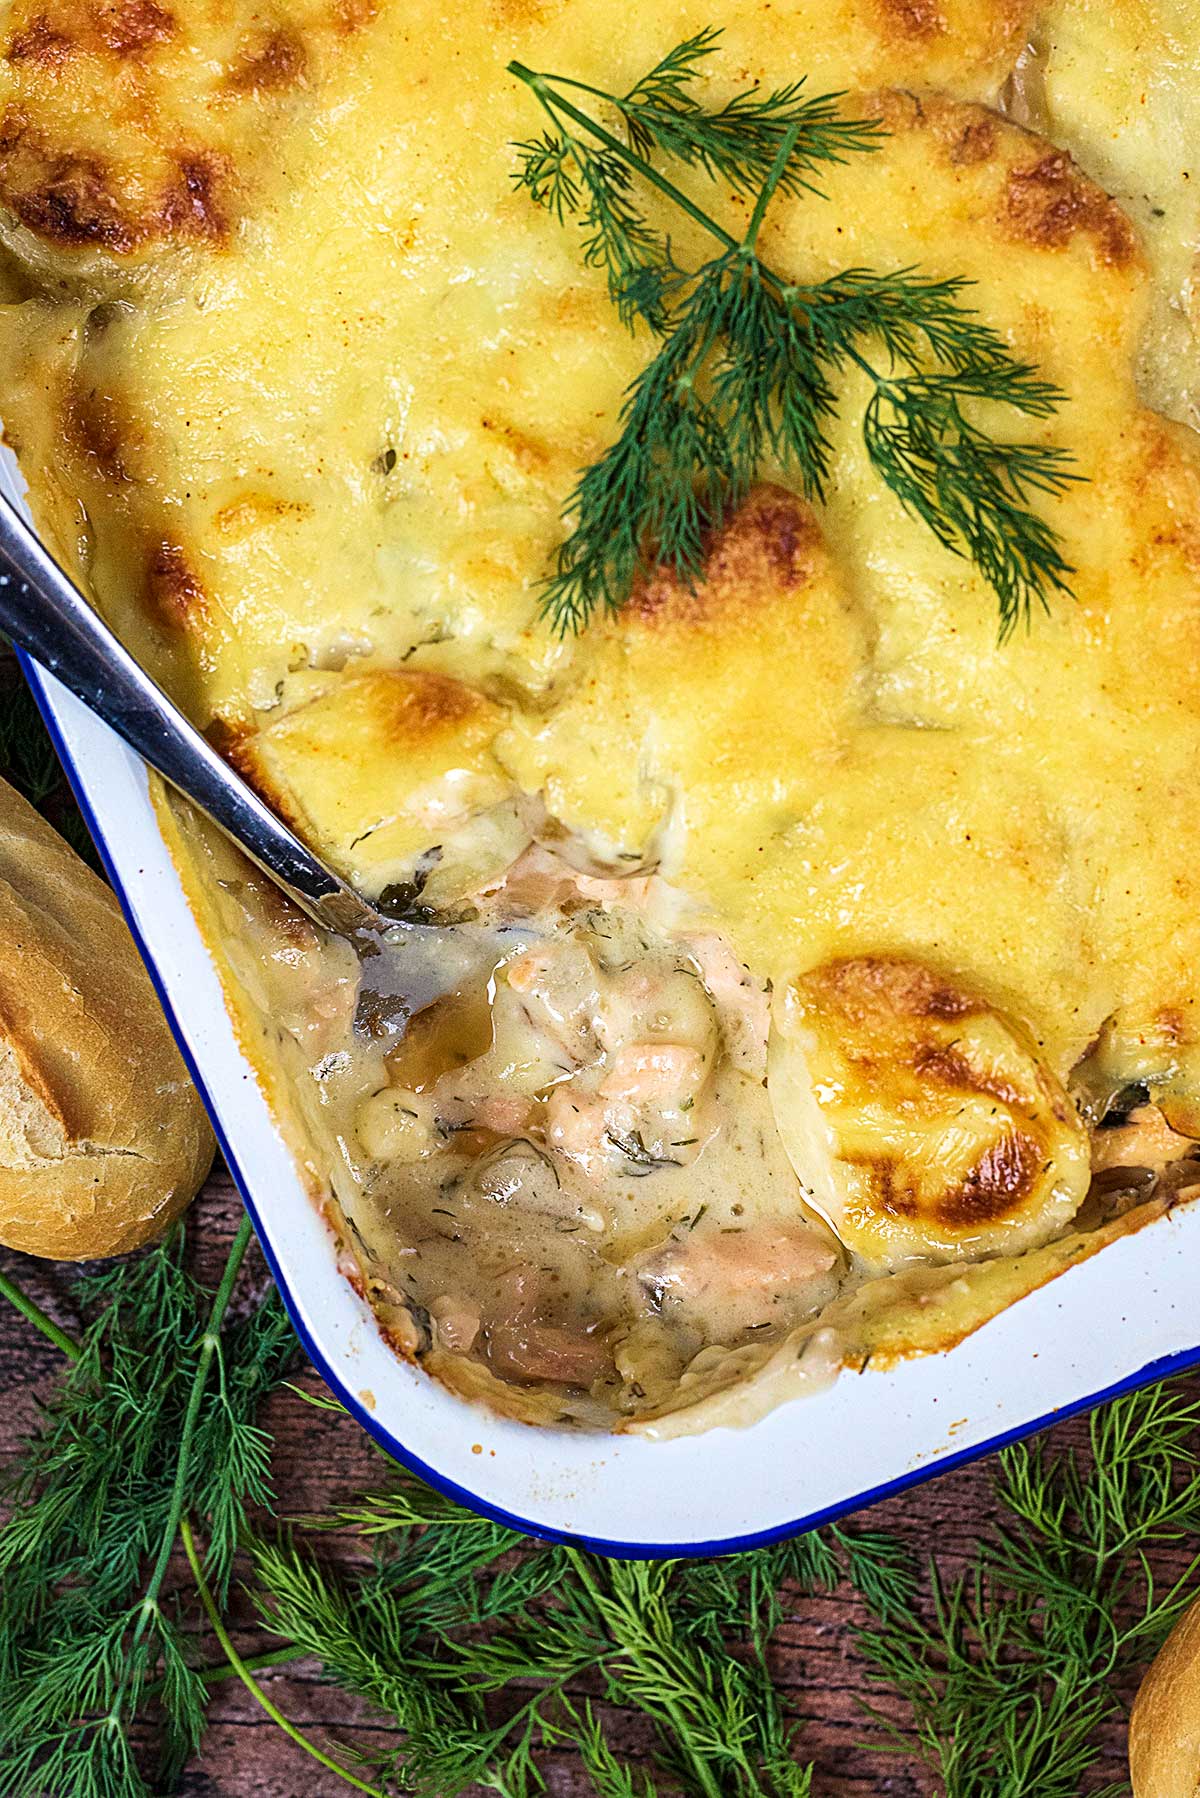 Salmon casserole in a baking tray with a section spooned out revealing the filling.